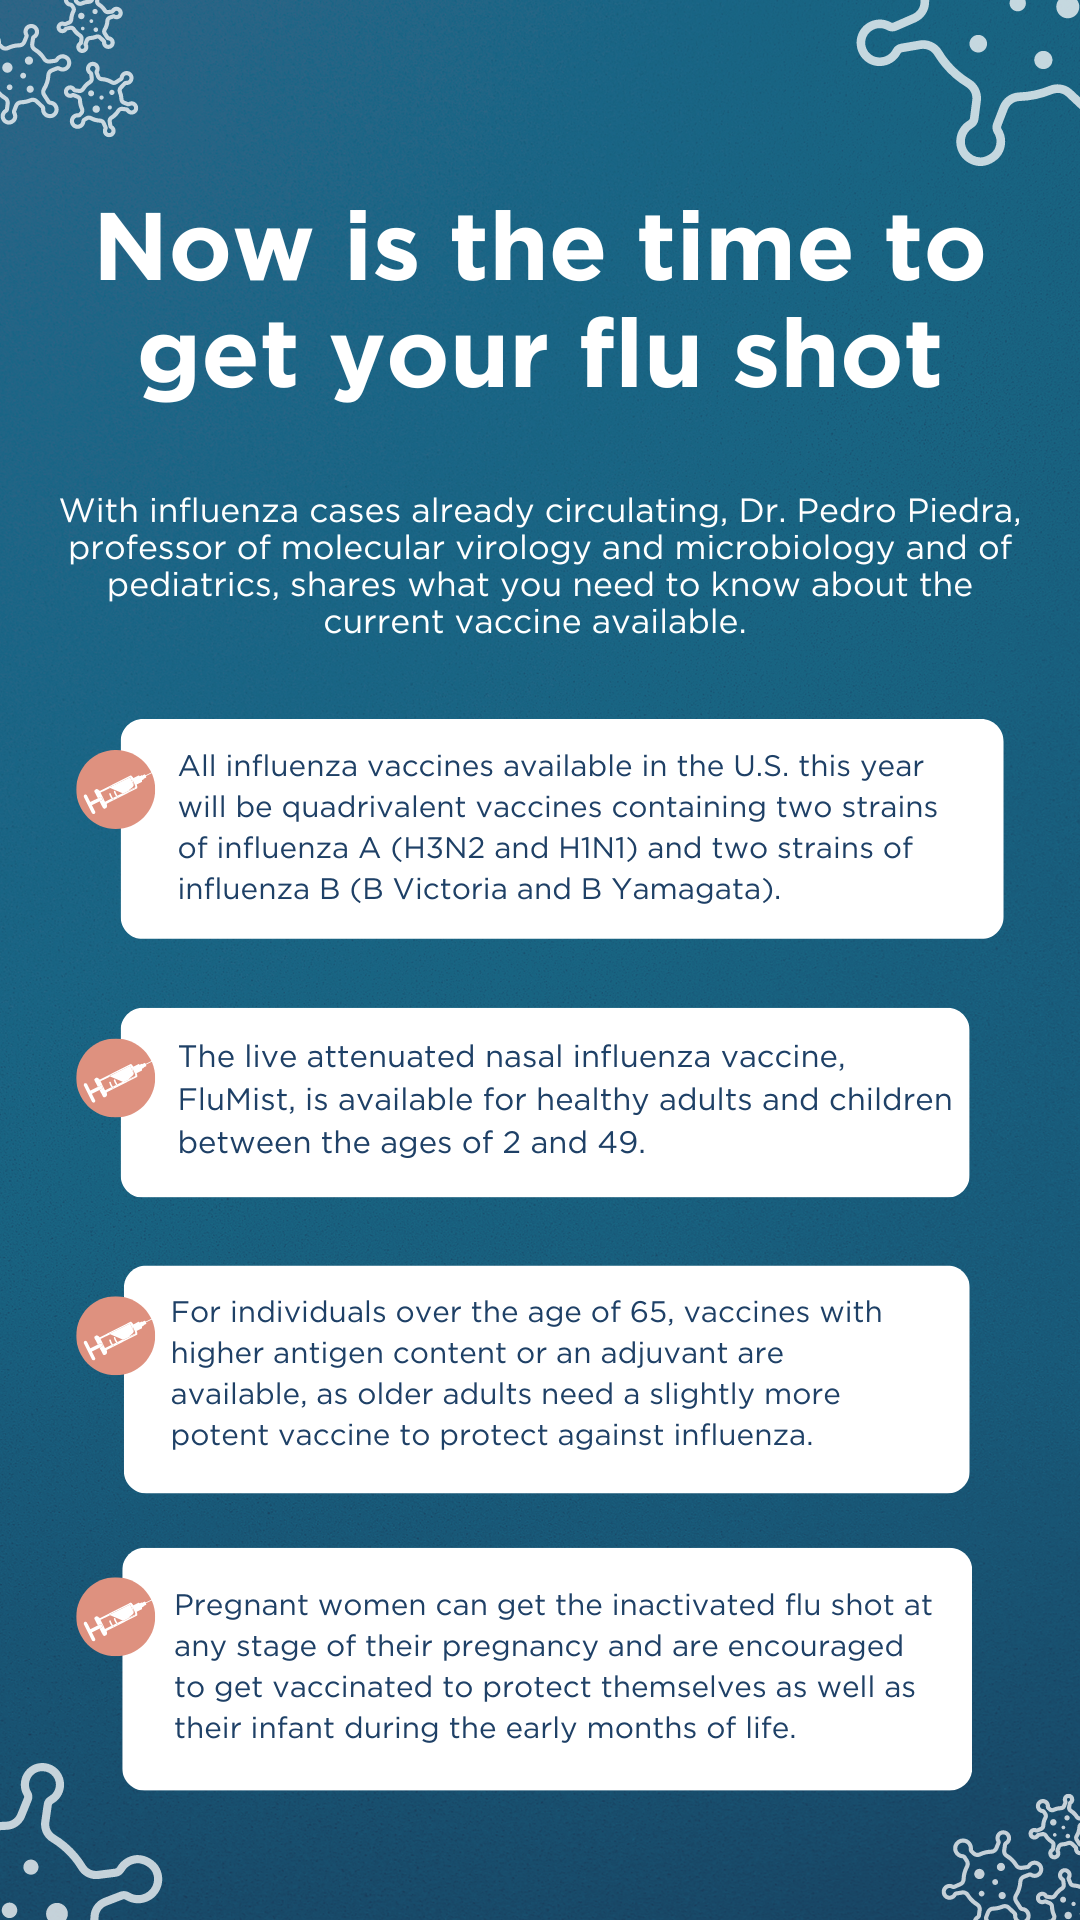 Now is the time to get your flu shot. All influenza vaccines available in the U.S. this year will be quadrivalent vaccines containing two strains of influenza A (H3N2 and H1N1) and two strains of Influenza B (B Victoria and B Yamagata). The live attenuated nasal influenza vaccine, FluMist, is available for healthy adults and children between the ages of 2 and 49. For individuals over the age of 65, vaccines with higher antigen content or an adjuvant are available, as older adults need a slightly more potent vaccine to protect against influenza. Pregnant women can get the inactivated flu shot at any stage of their pregnancy and are encouraged to get vaccinated during the early months of life.